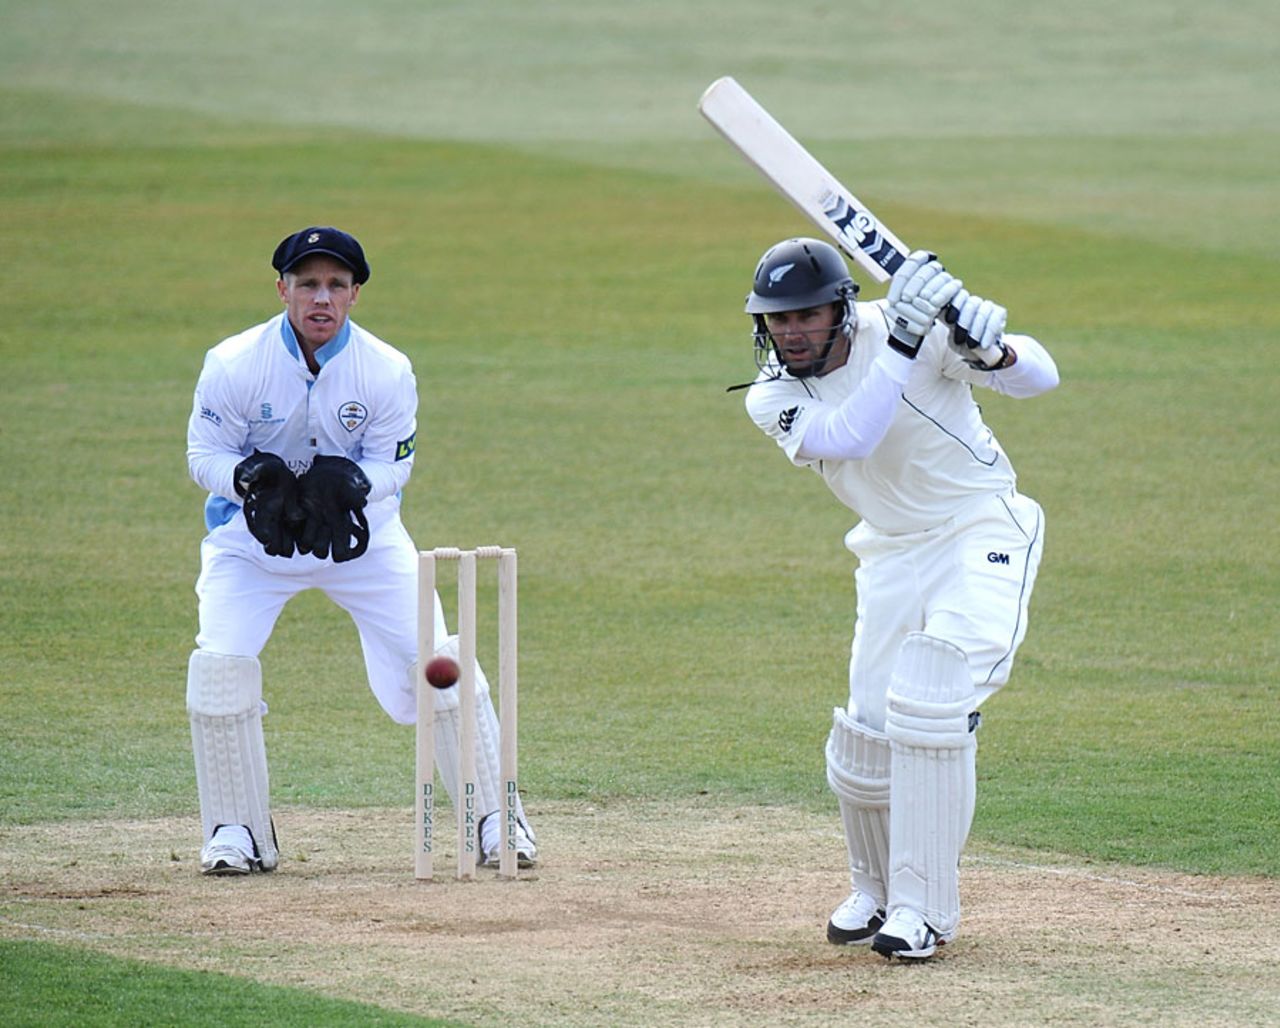 Dean Brownlie goes through the off side during his 71, Derbyshire v New Zealanders, Tour Match, 1st day, Derby, May 4, 2013